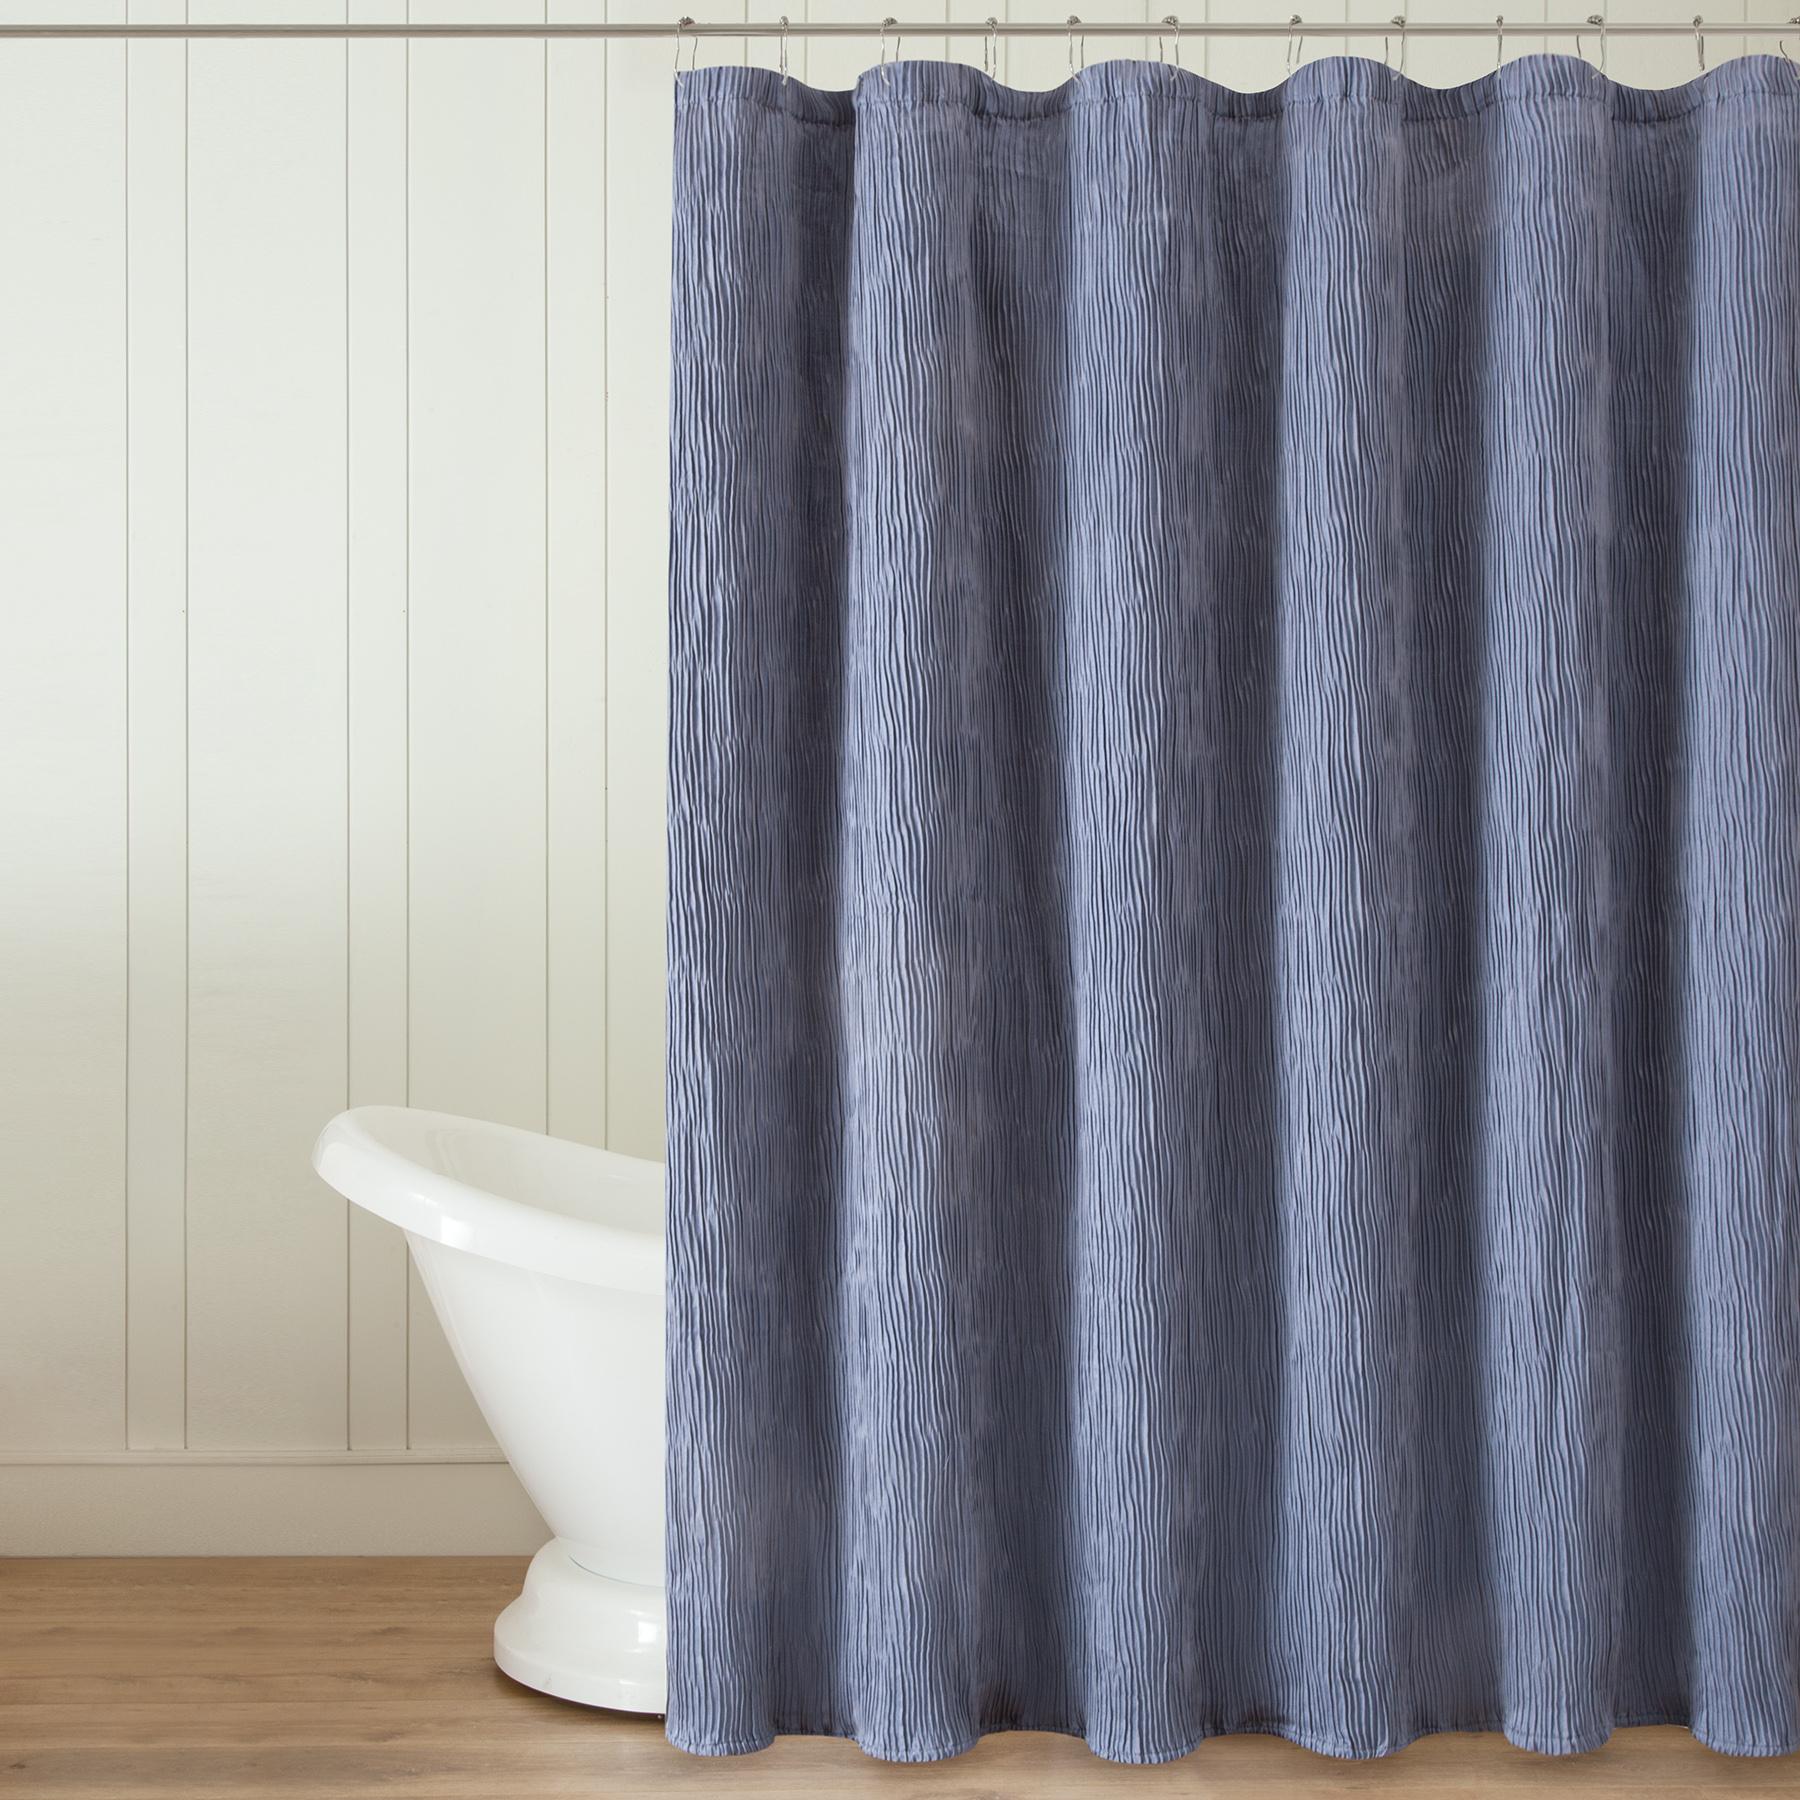 Cannon Crinkled Shower Curtain